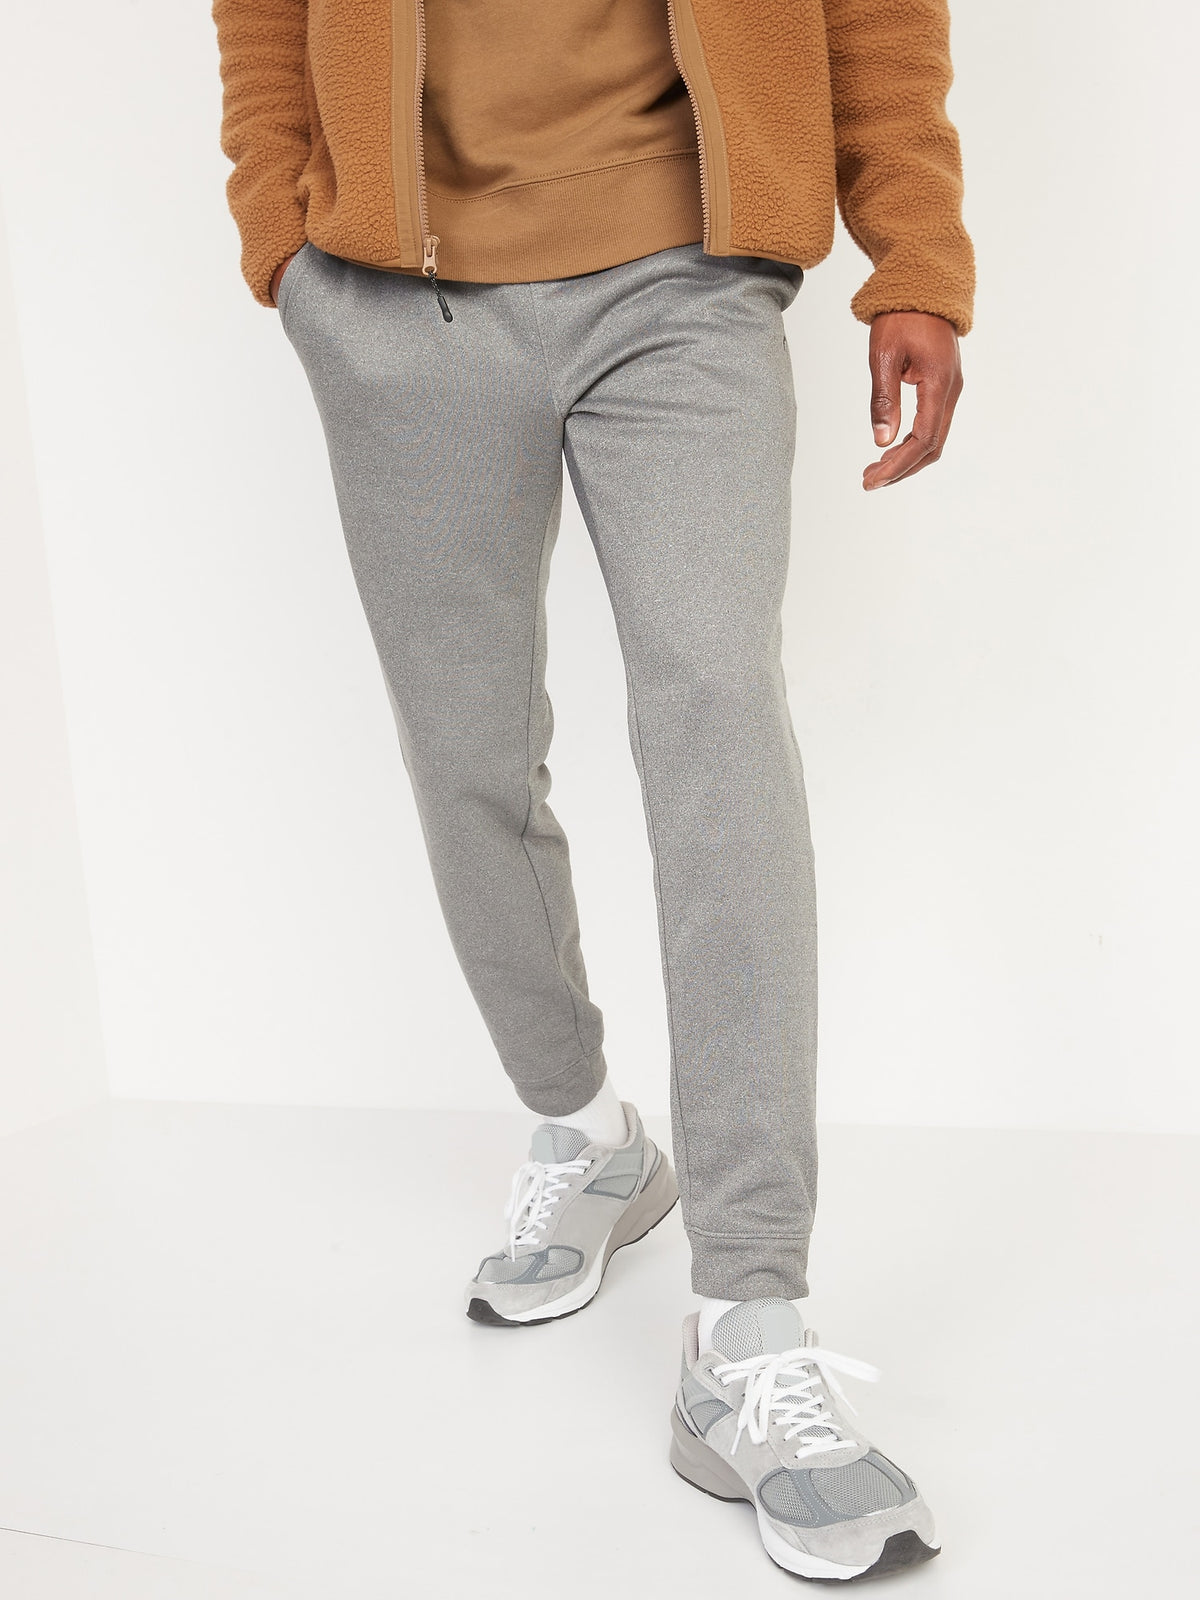 Go-Dry Performance Jogger Sweatpants for Men - Old Navy Philippines